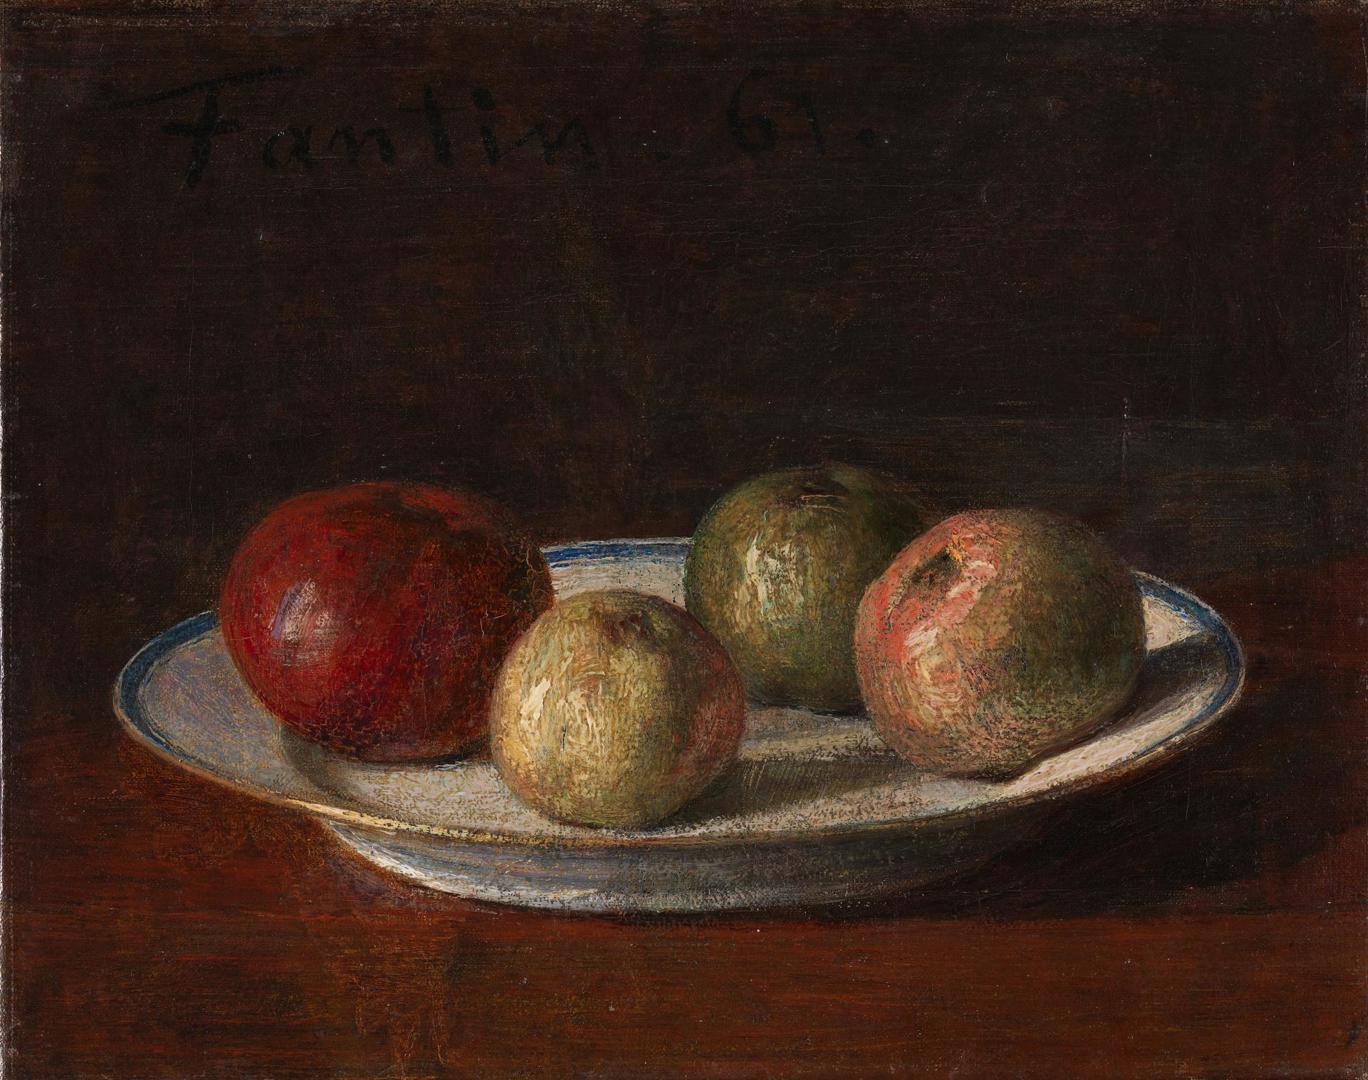 A Plate of Apples by Ignace-Henri-Théodore Fantin-Latour